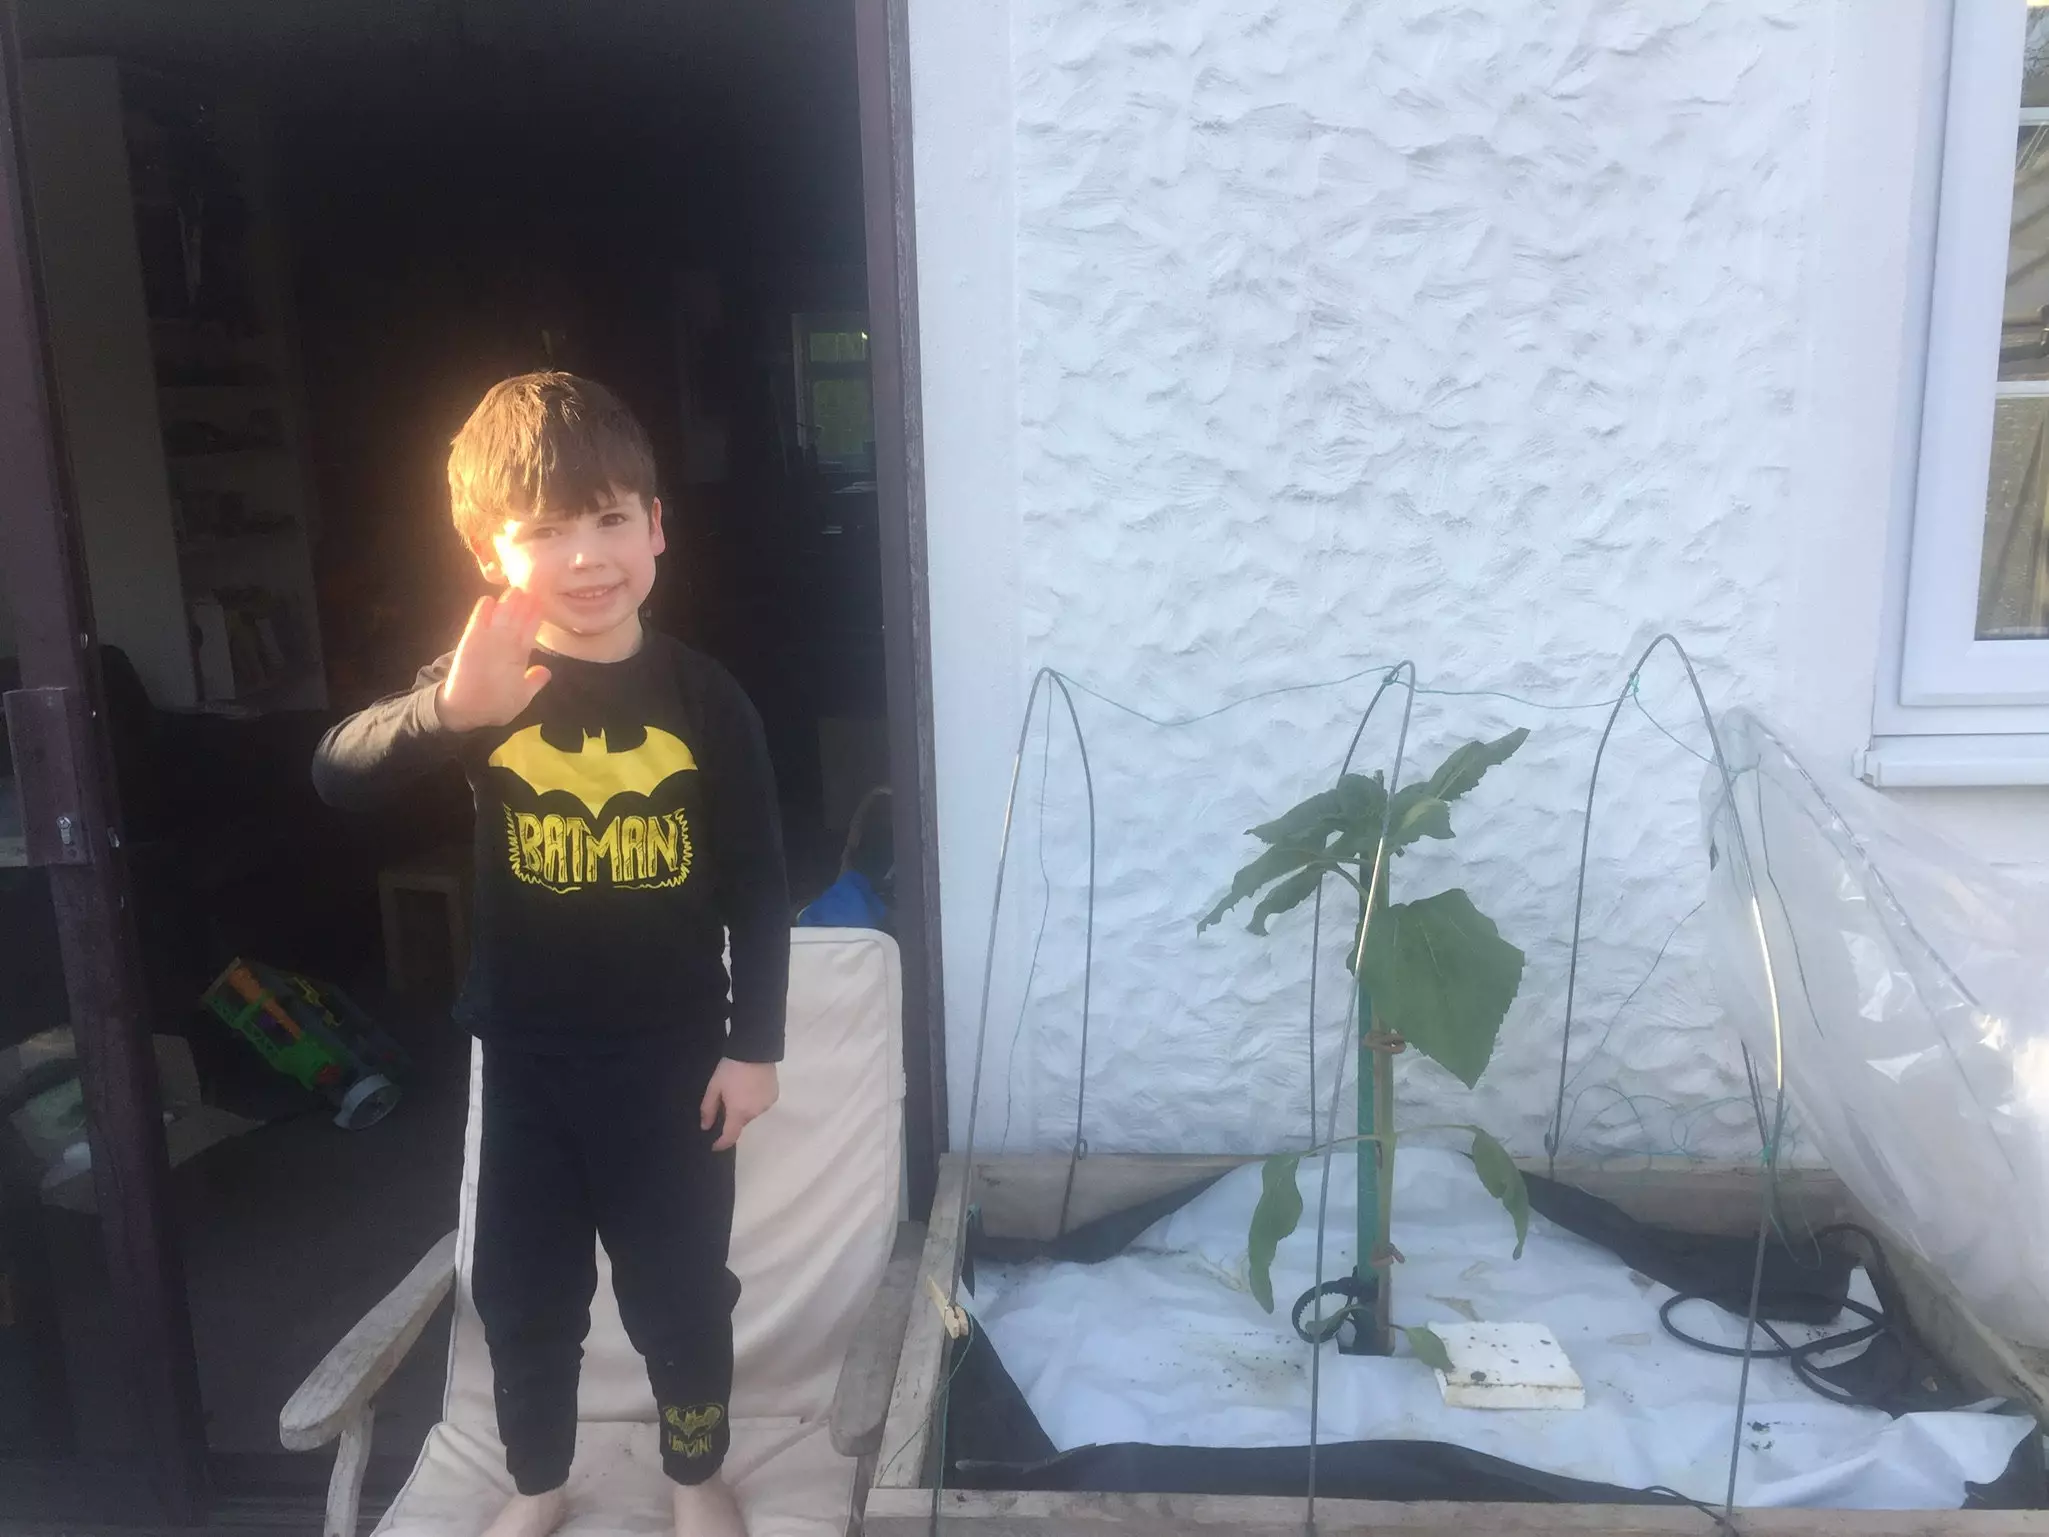 Four-year-old Stellan would never have imagined that the sunflower would grow as tall as his house (